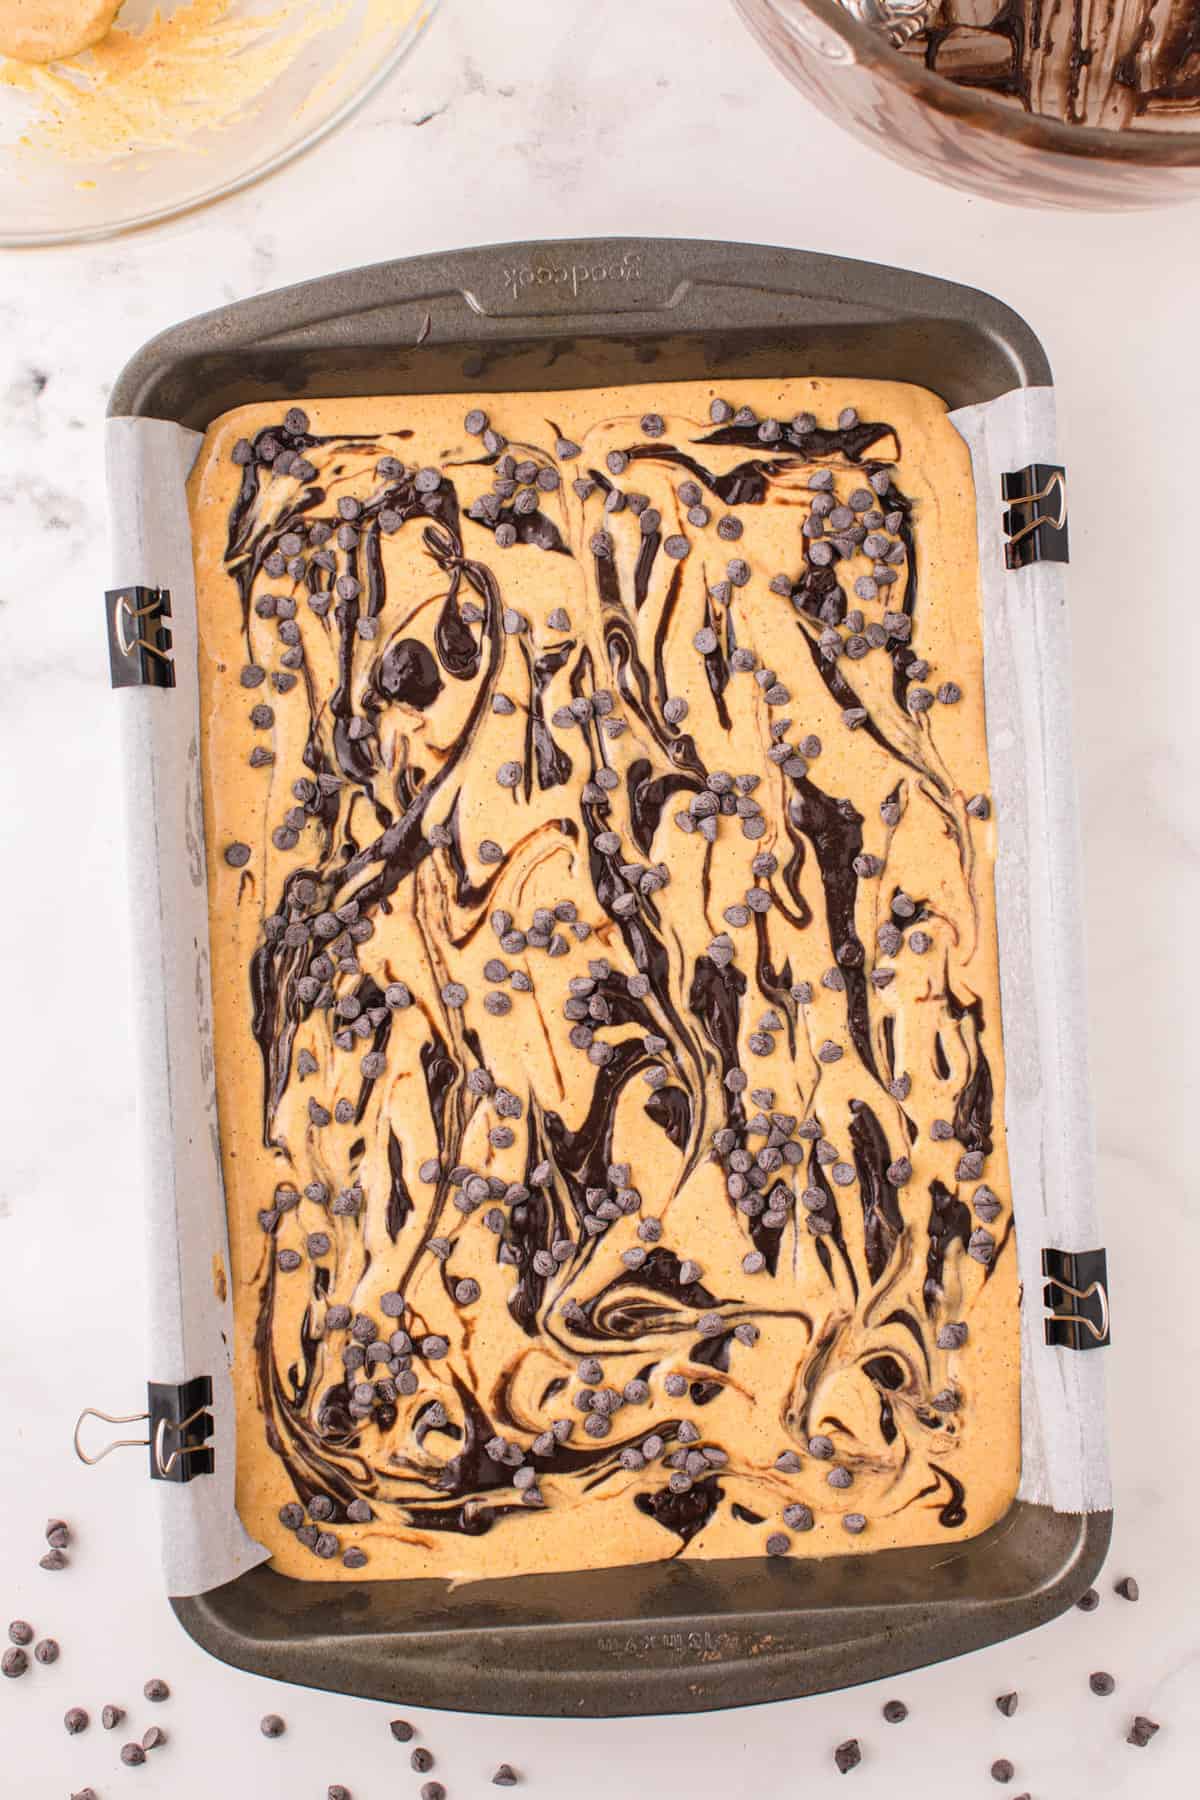 Swirling brownie mixture with mini chocolate chips on top of layers for Pumpkin Brownies Recipe